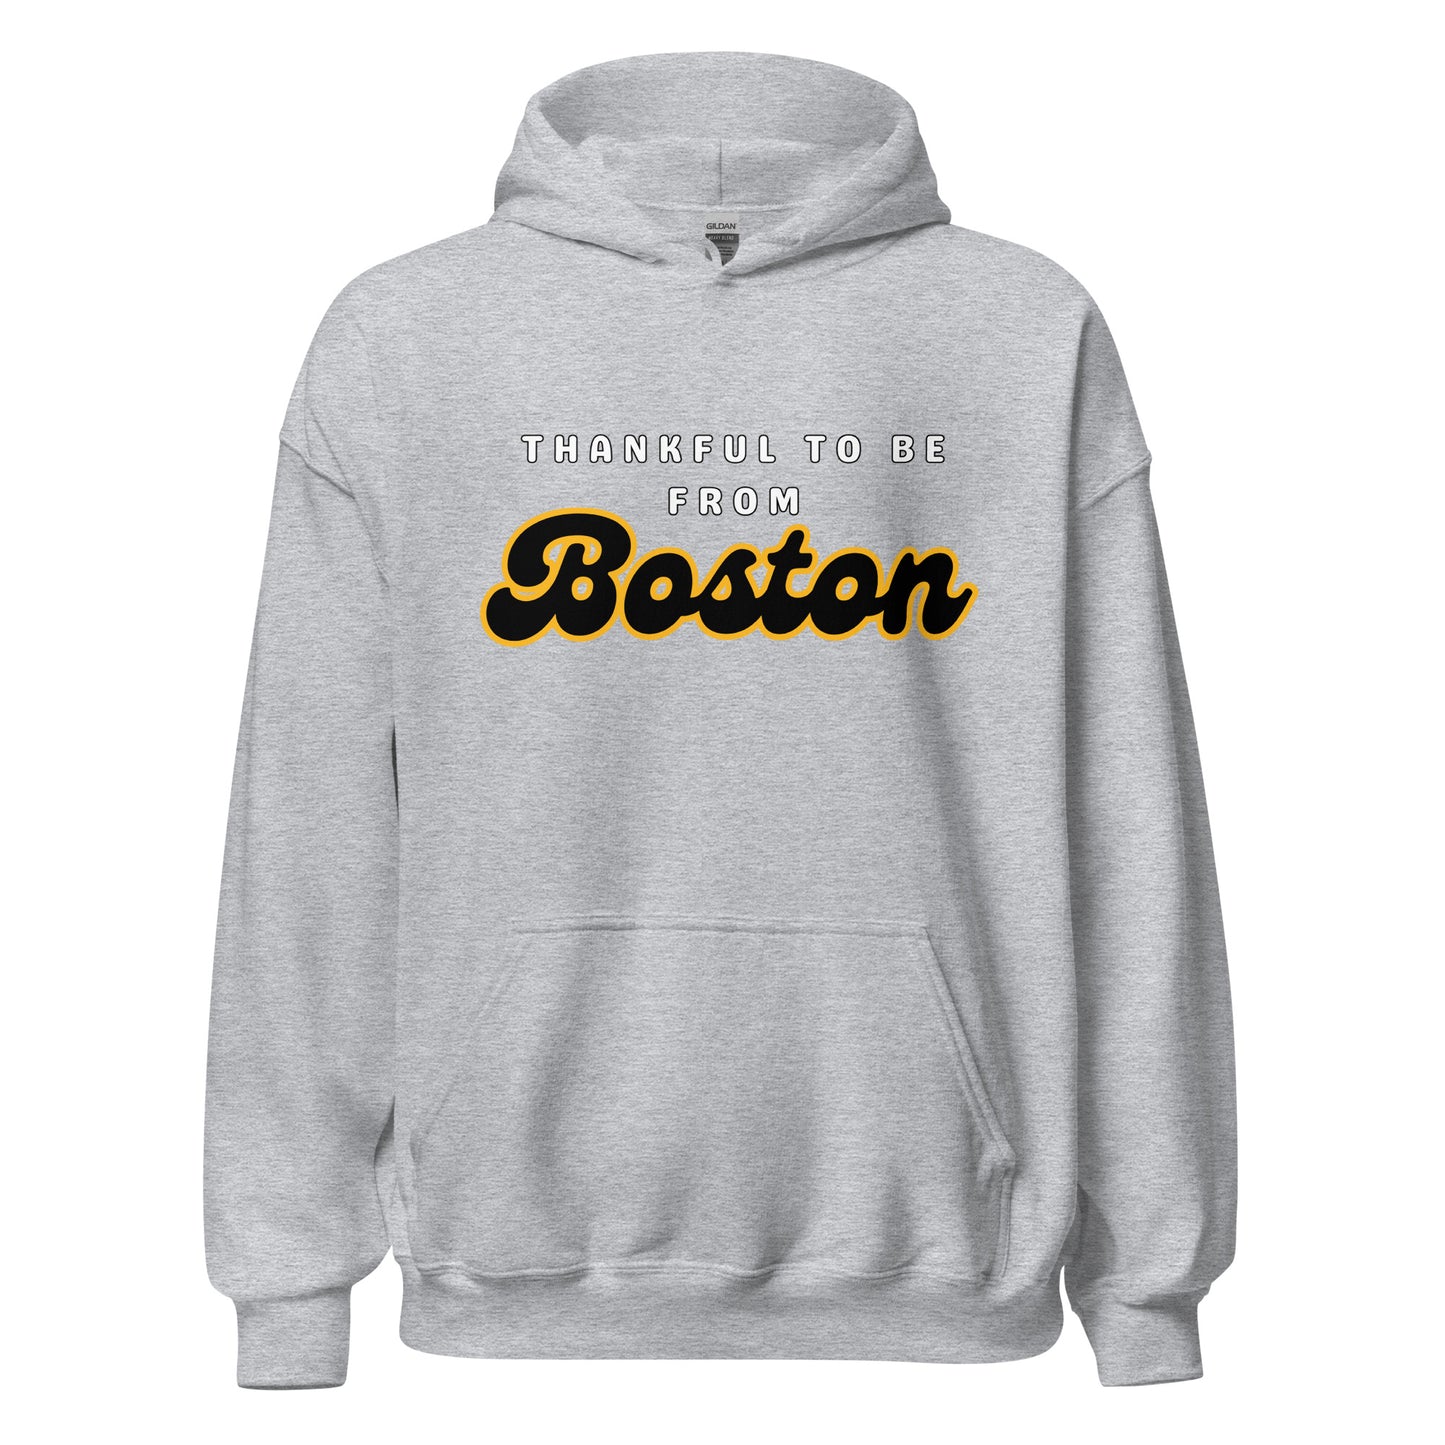 Thankful to Be From Boston Hoodie